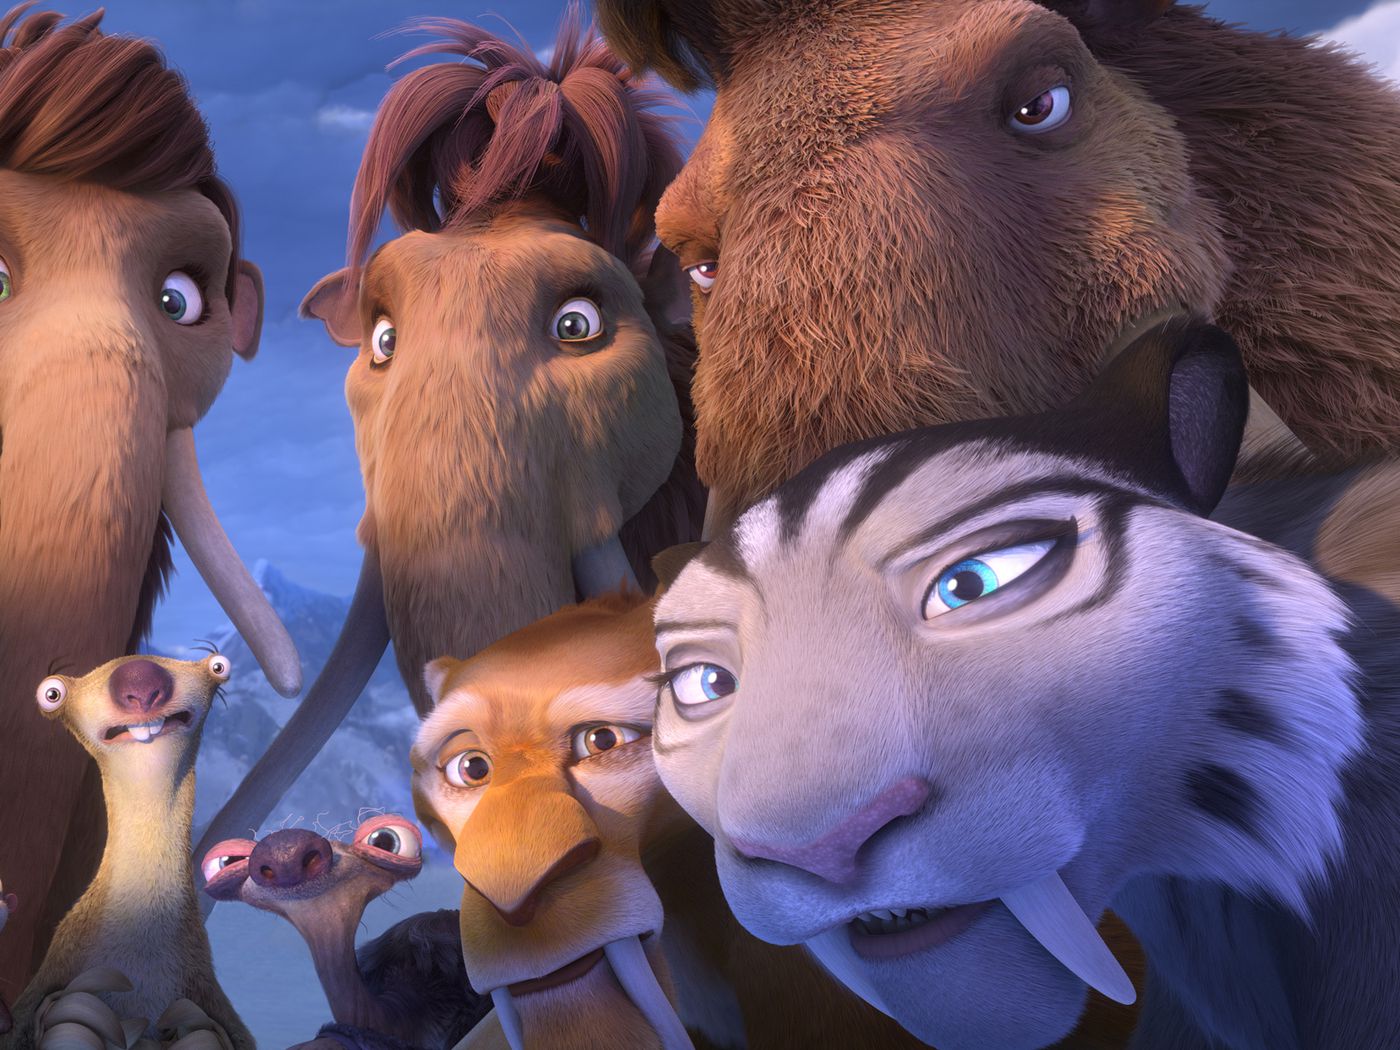 ice age movies in order